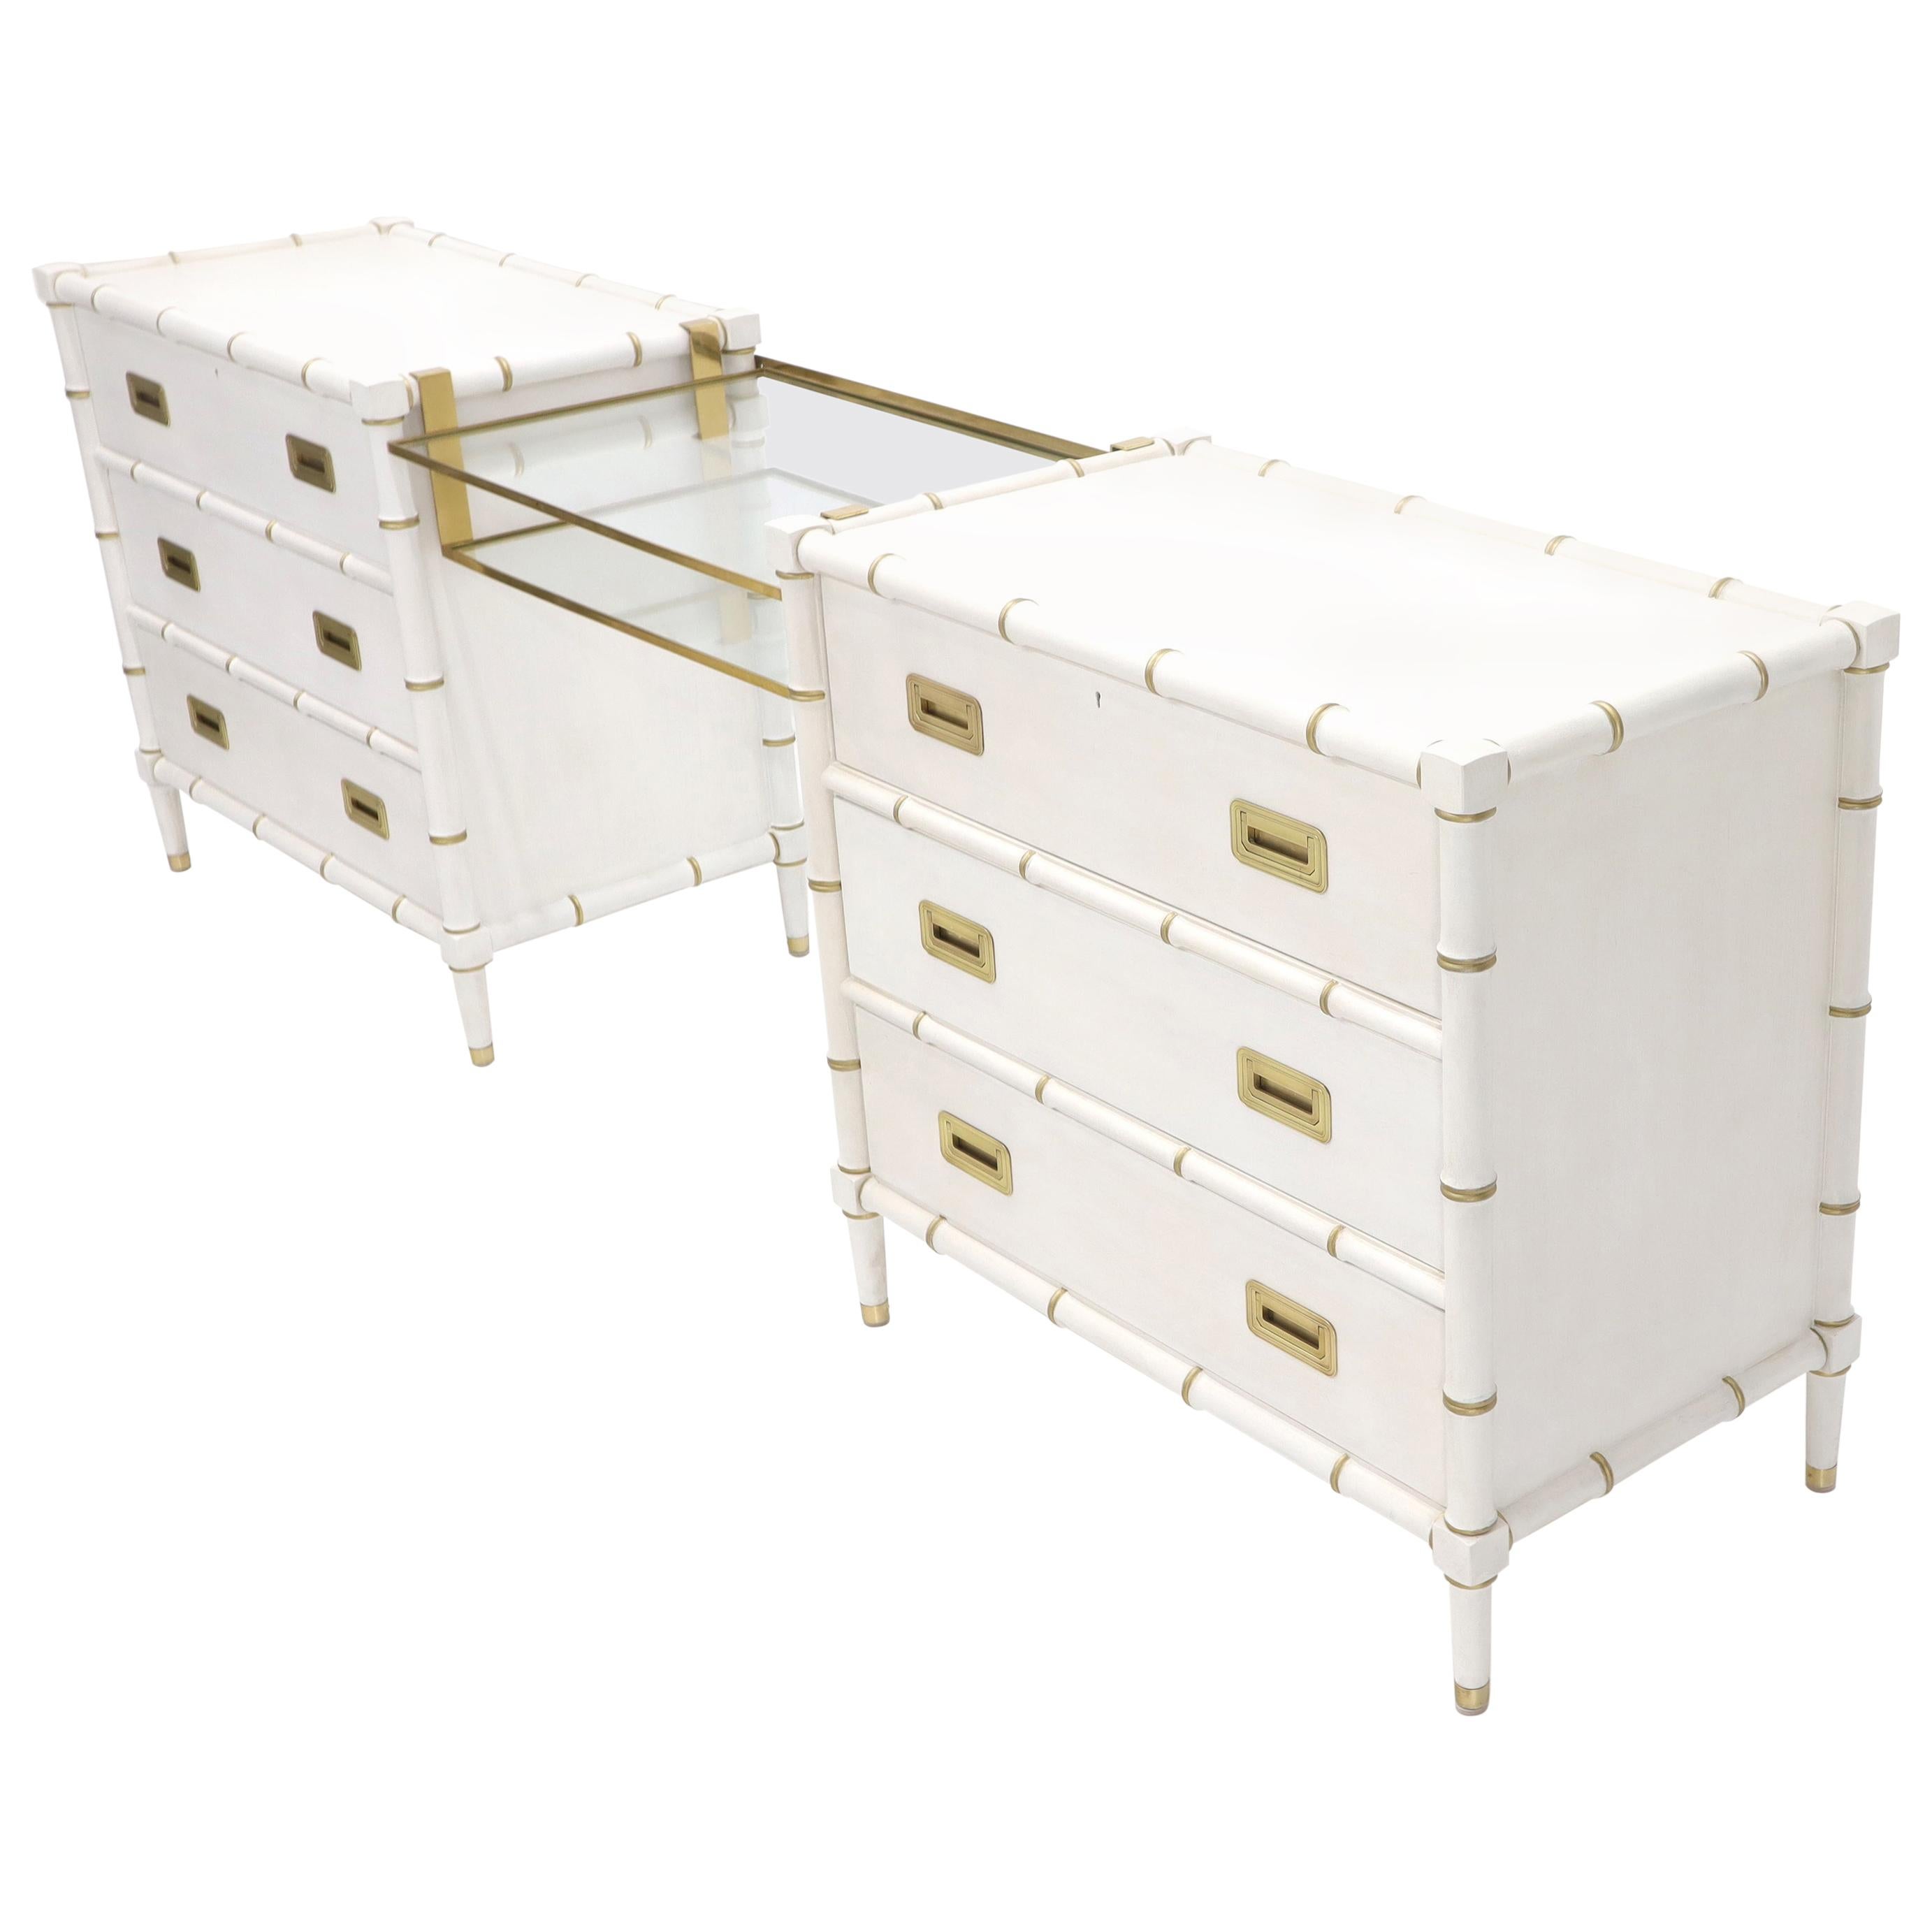 Pair of White Lacquer Brass Hardware Bachelor Chest with Suspended Brass Vanity For Sale